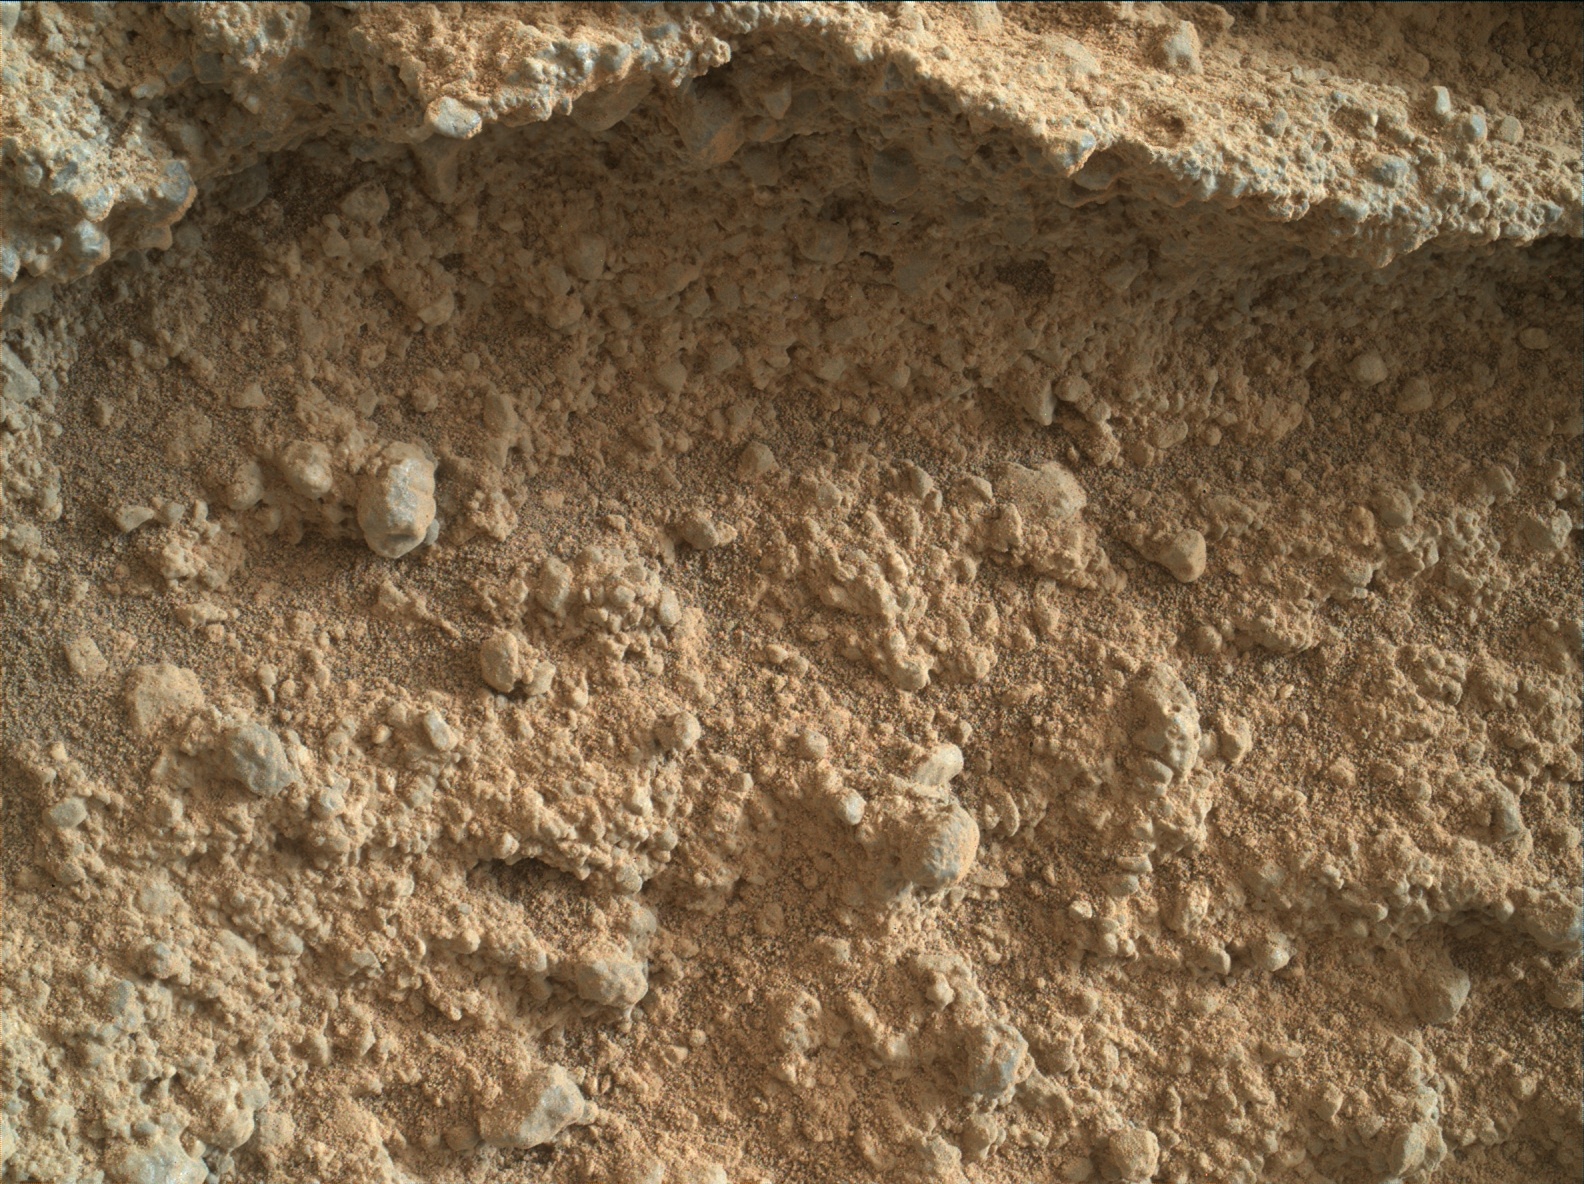 Nasa's Mars rover Curiosity acquired this image using its Mars Hand Lens Imager (MAHLI) on Sol 401